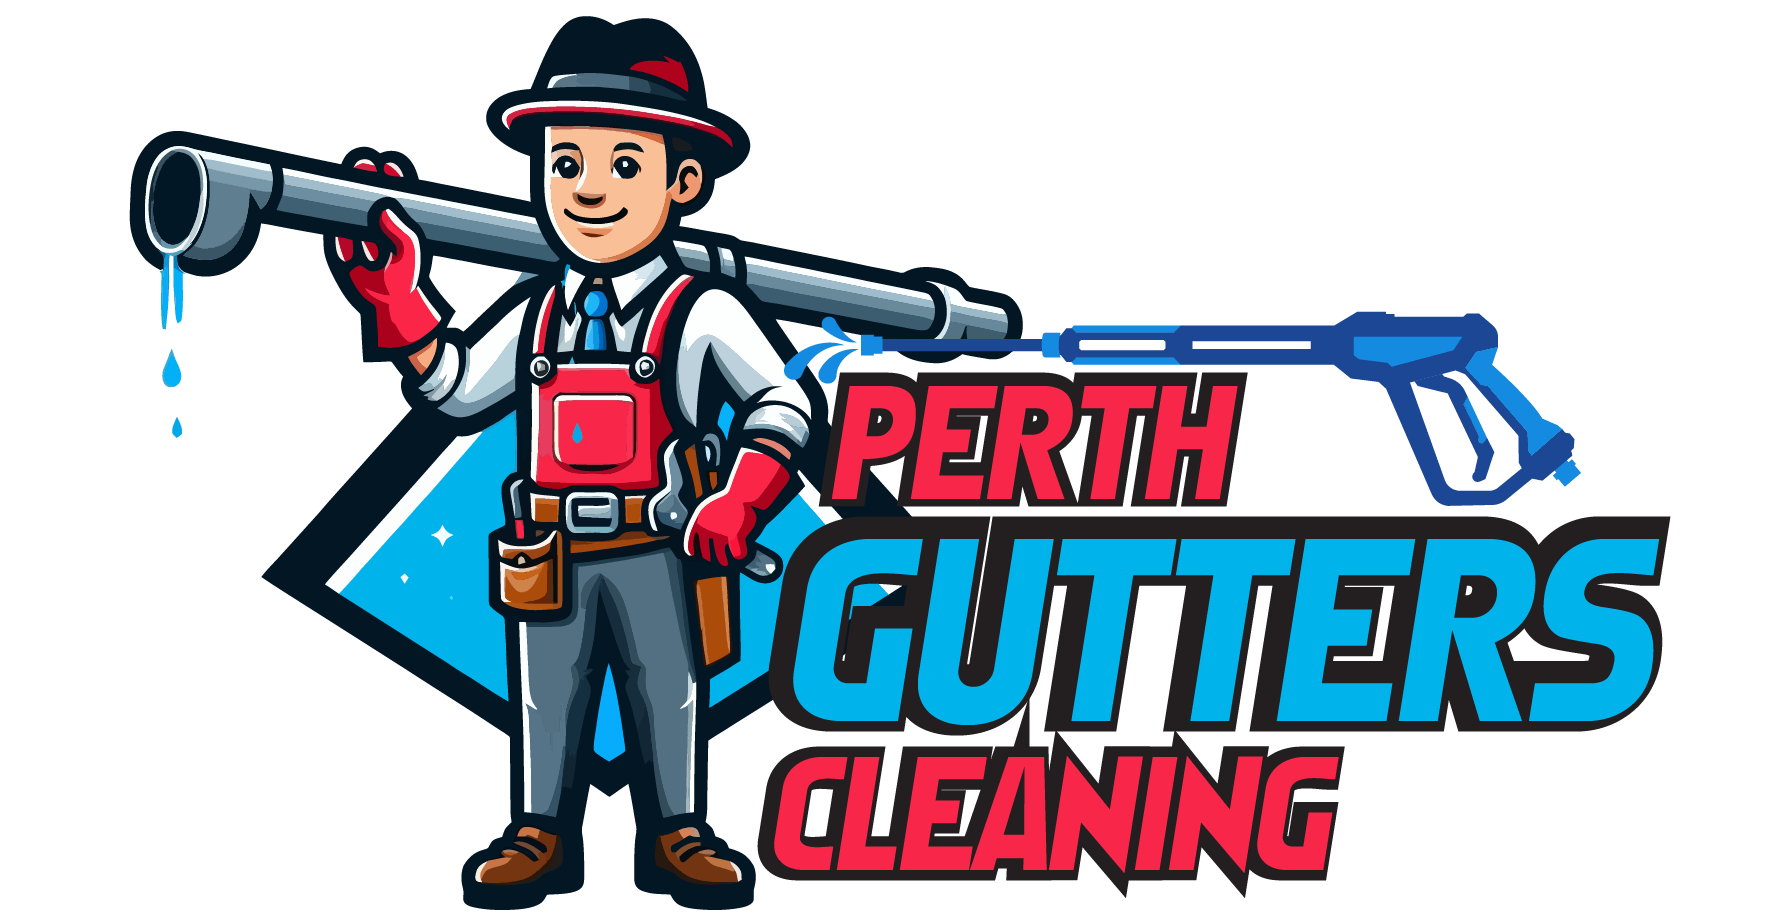 Perth Gutters Cleaning